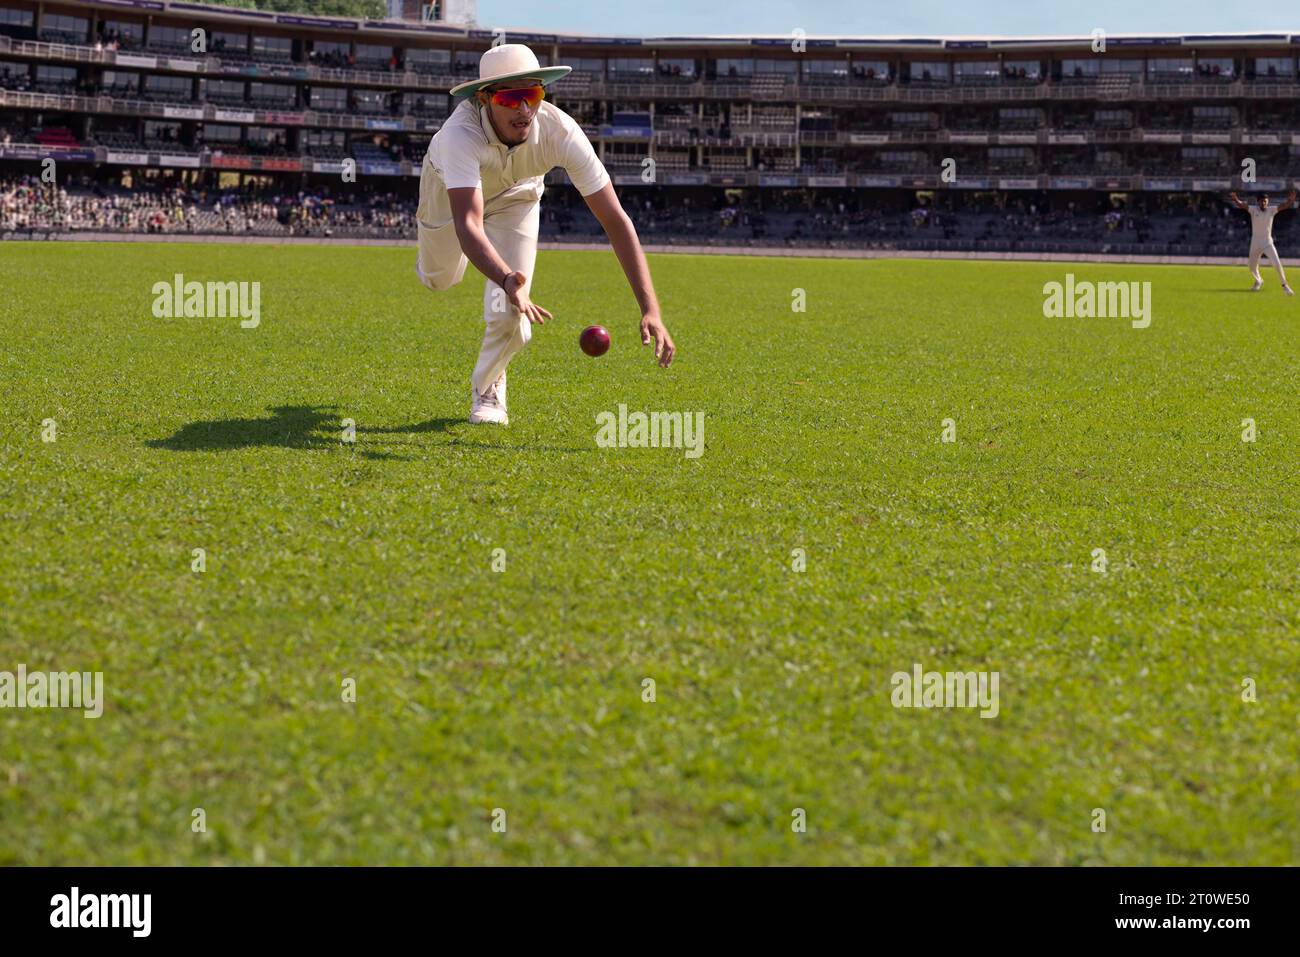 A fielder about to catch the  ball during a cricket match Stock Photo